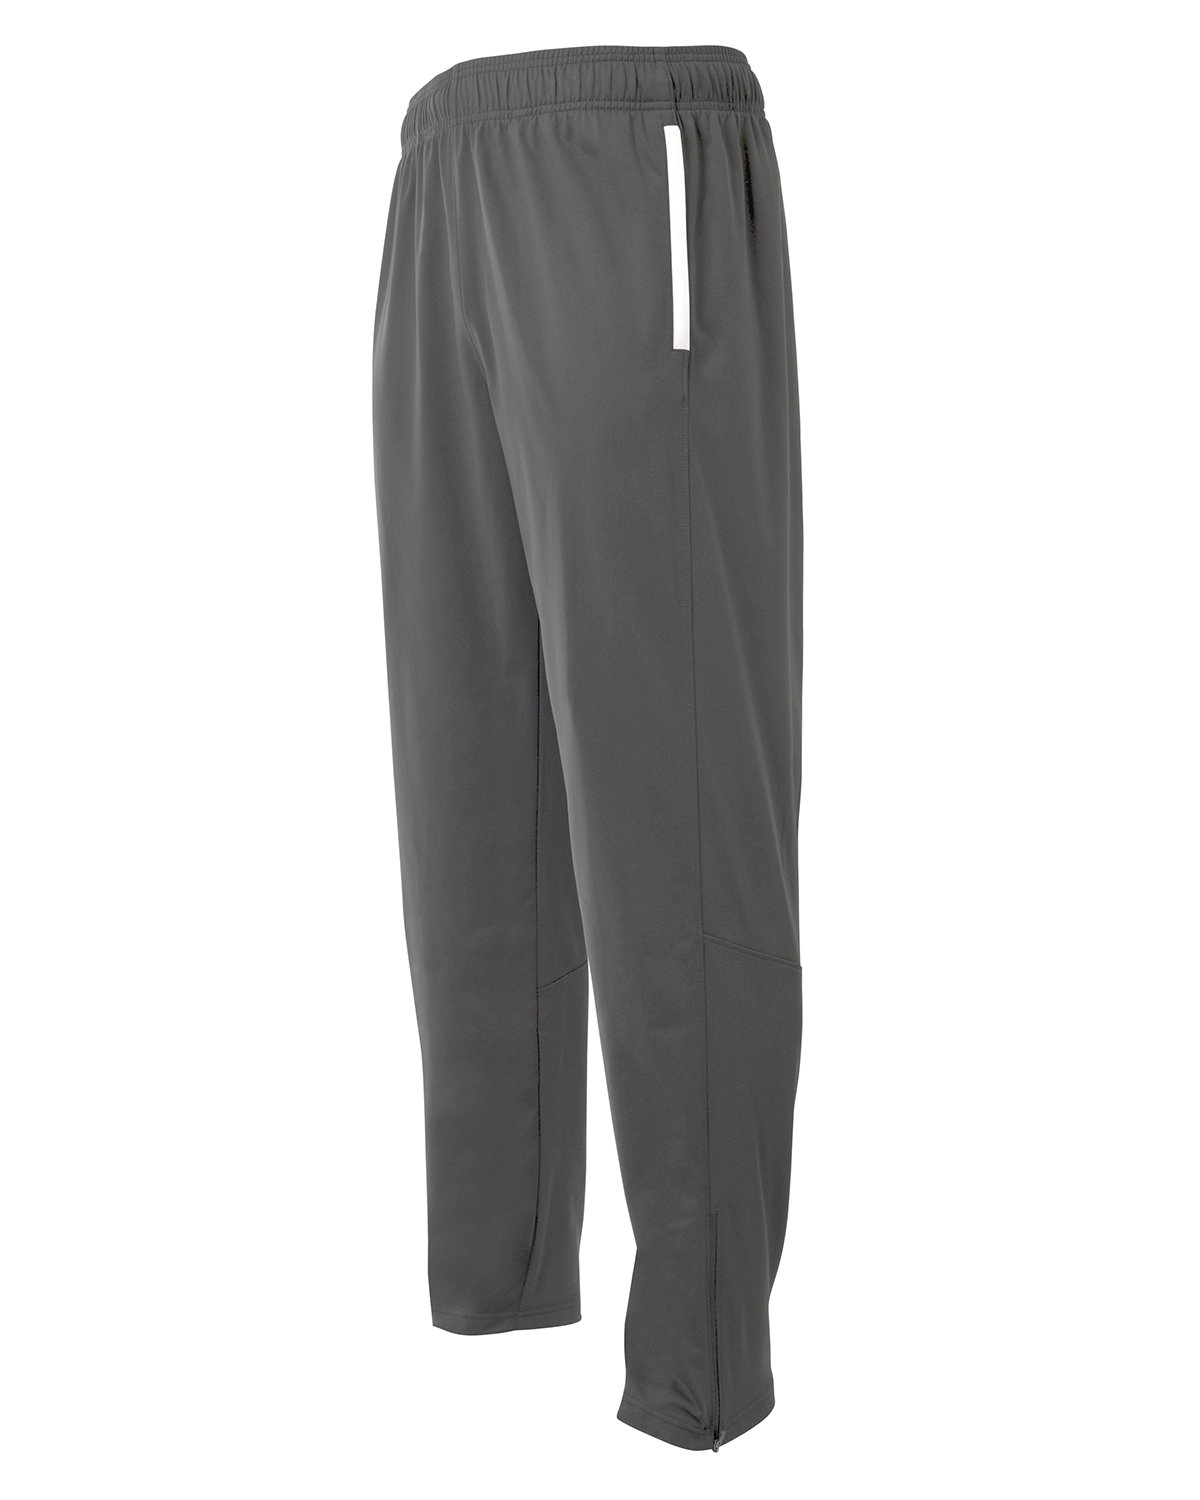 Front view of Adult League Warm Up Pant